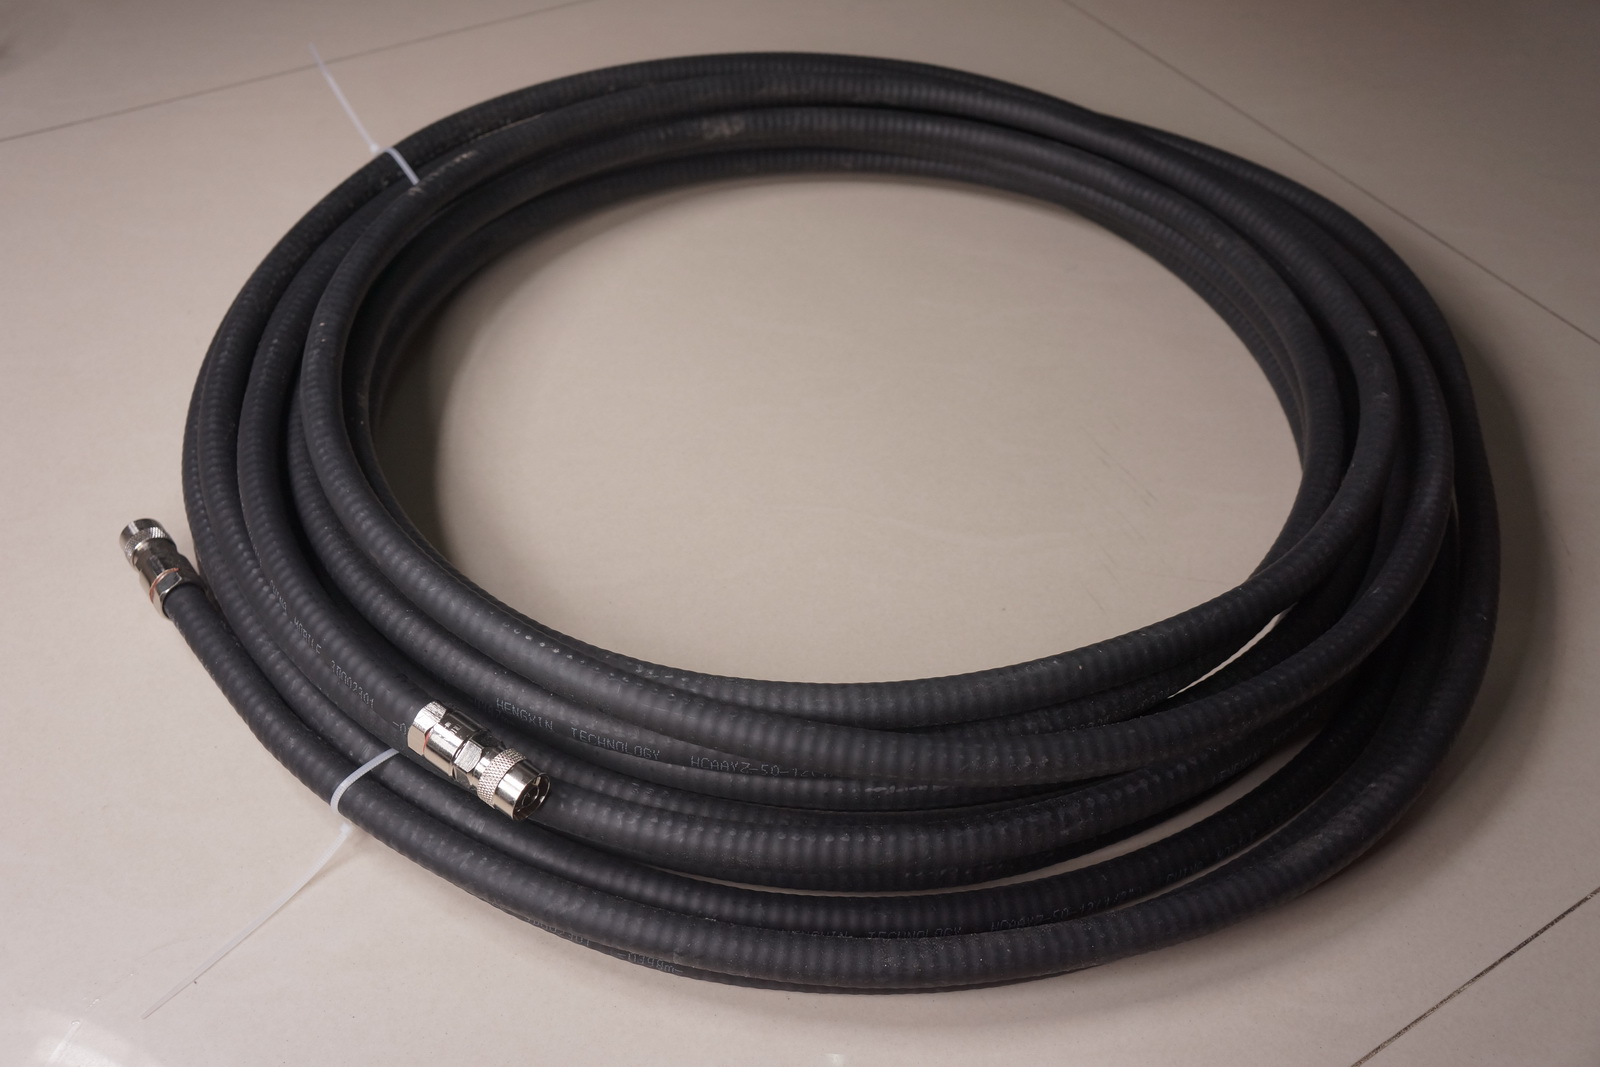 50-12 1/2" Coaxial cable 20 Meter with N type Connector - Click Image to Close